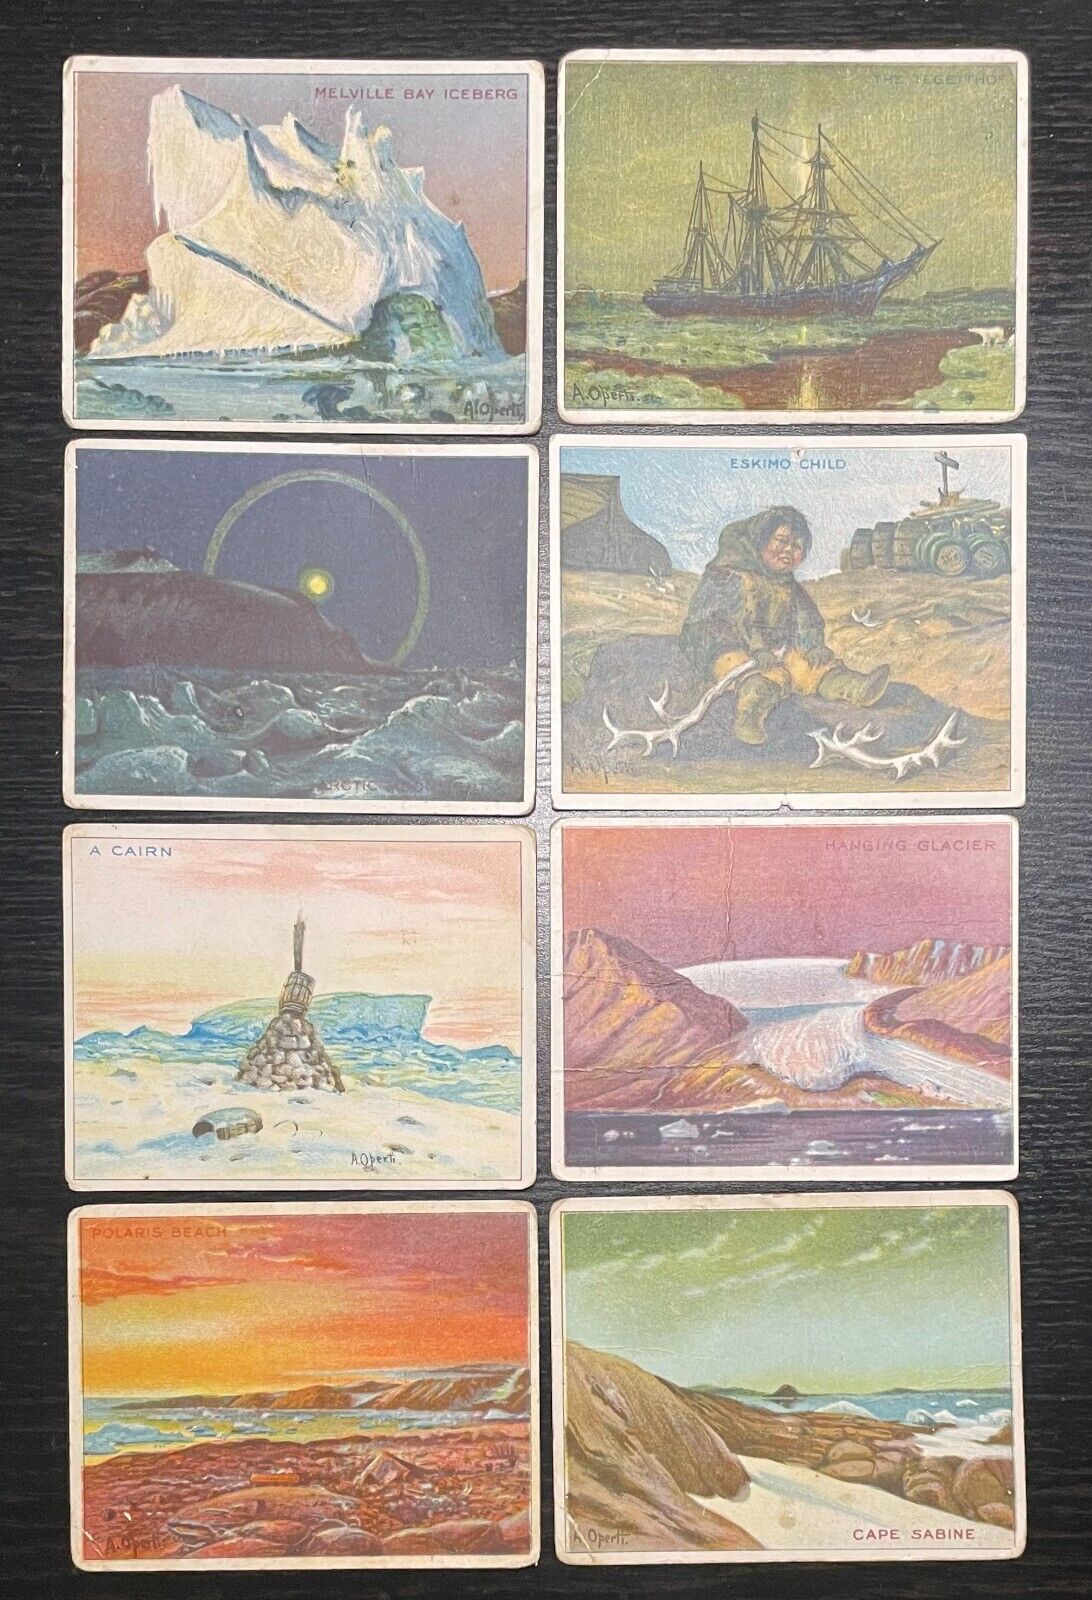 ARTIC SCENES 1910 HASSAN TOBACCO CARDS - 8 CARDS